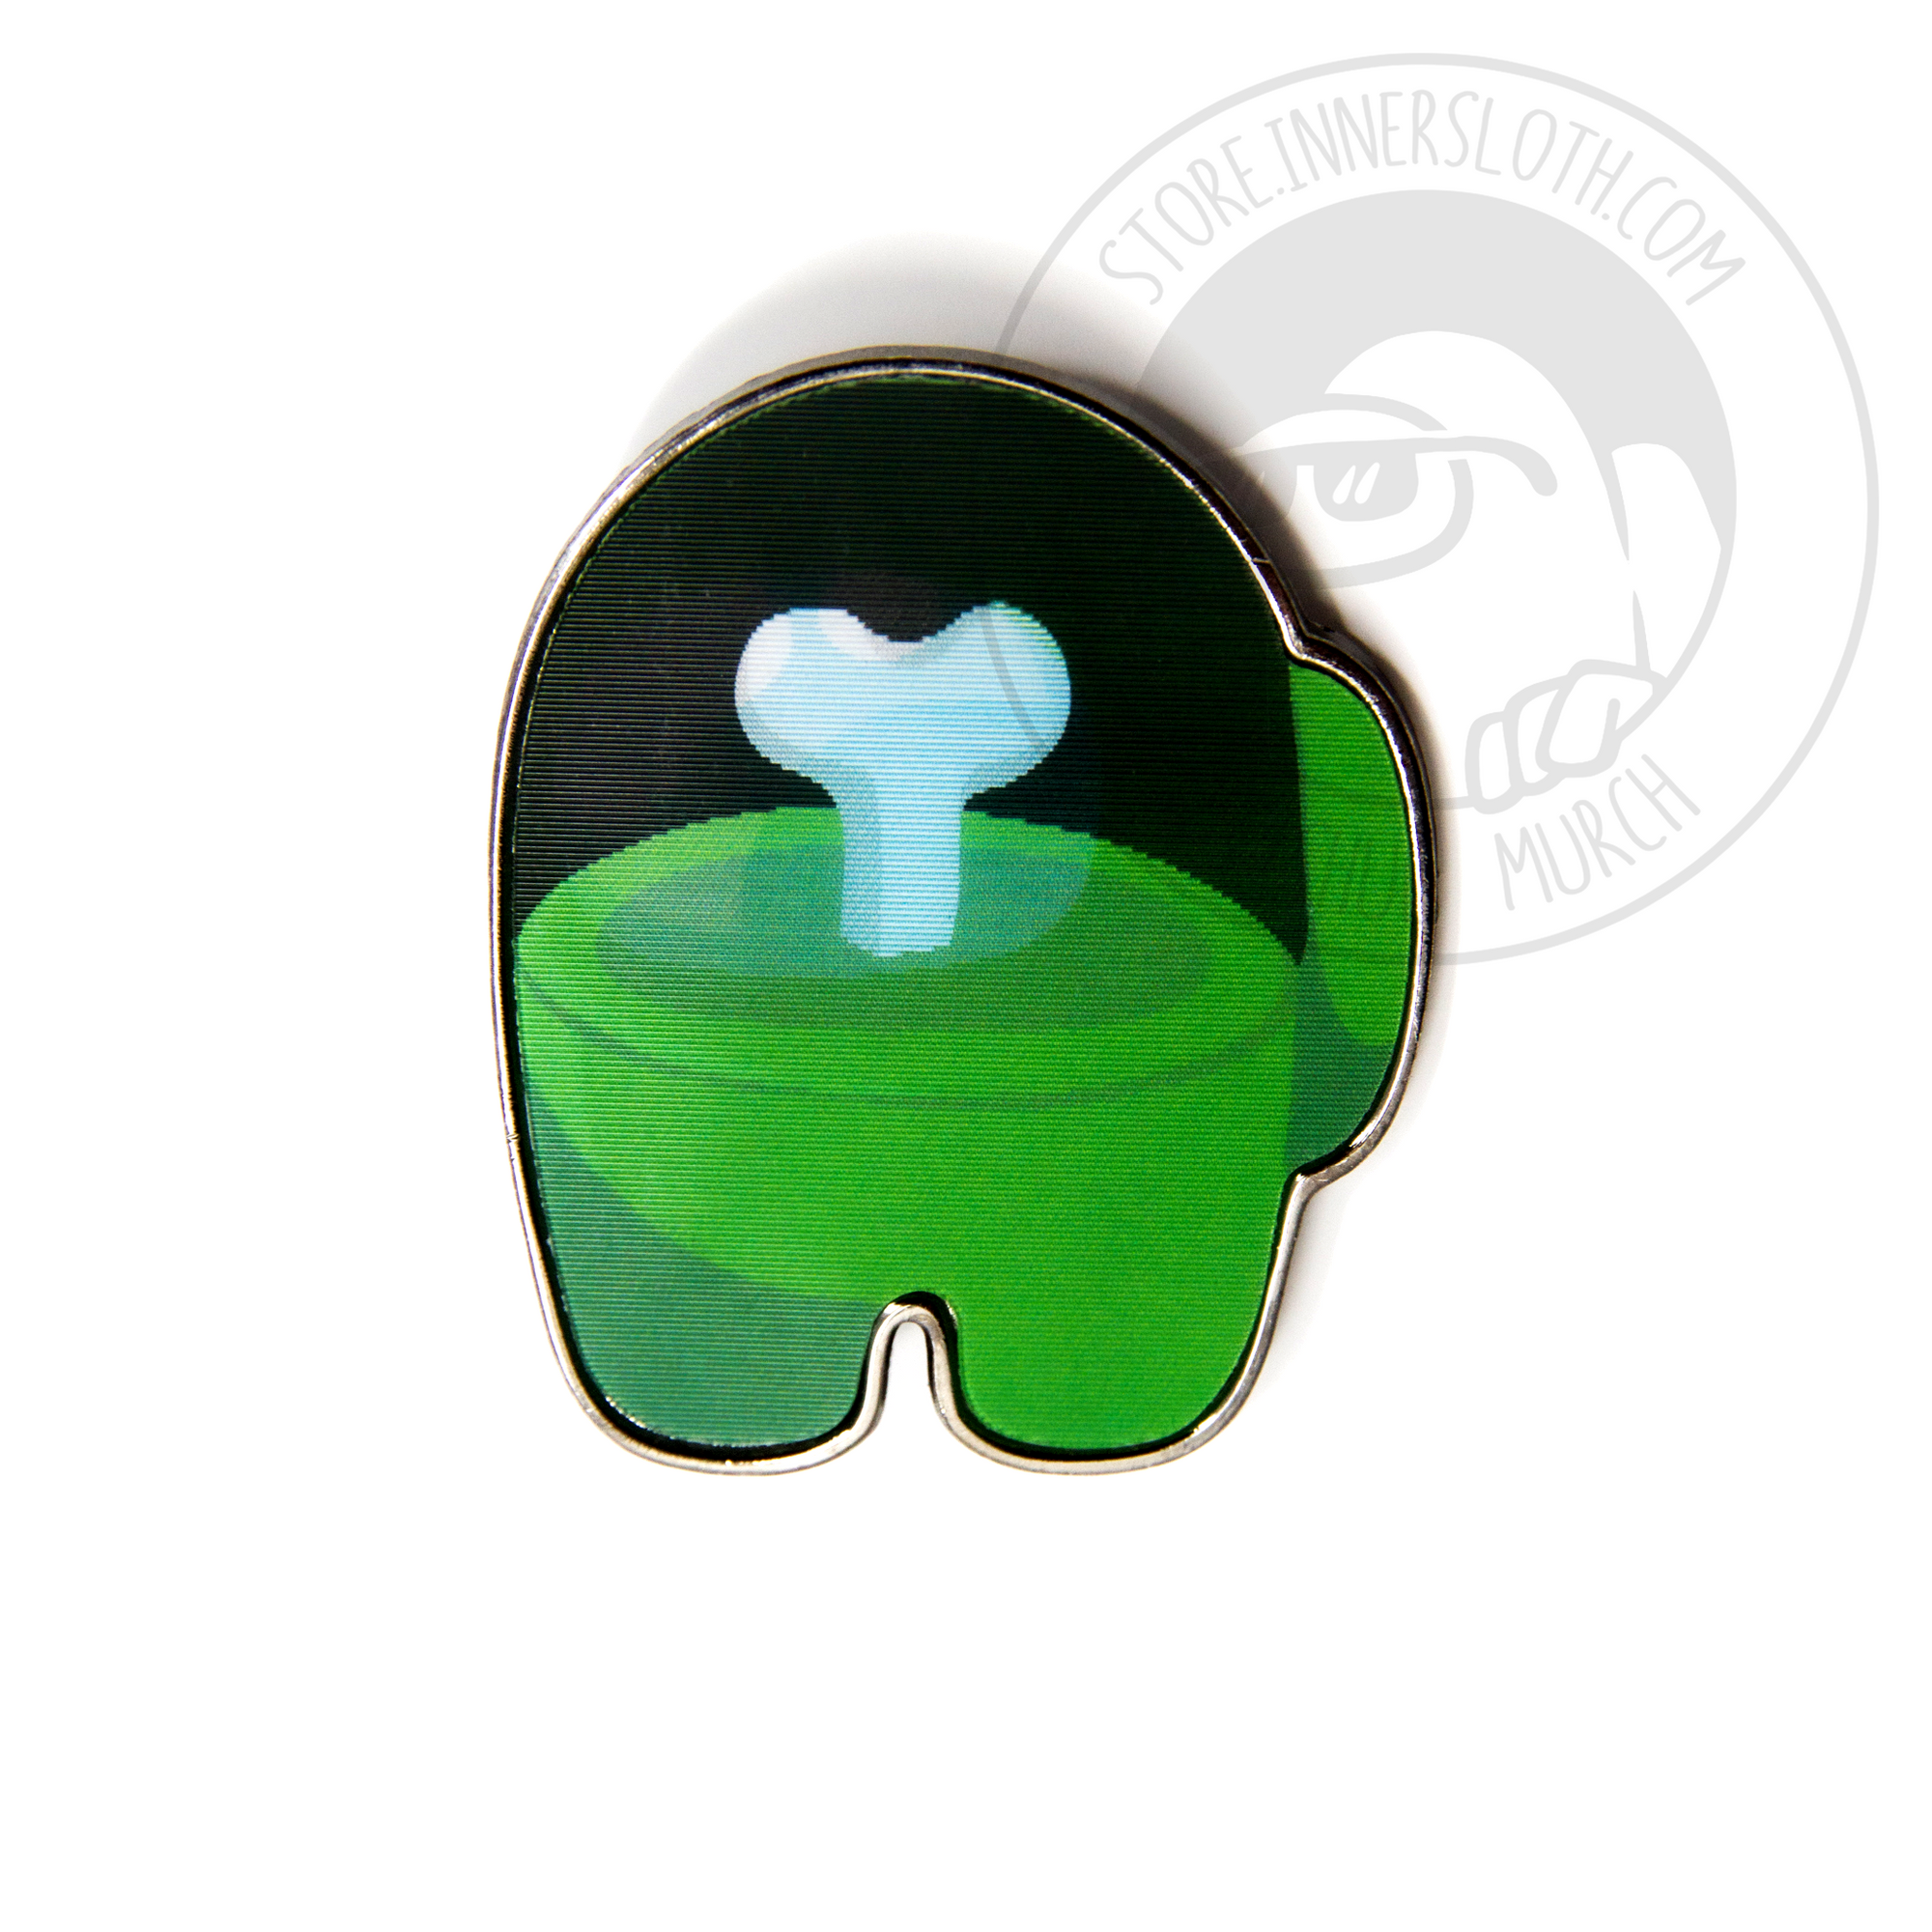 Among Us: Lenticular Impostor Pin - Green by Noble Demons